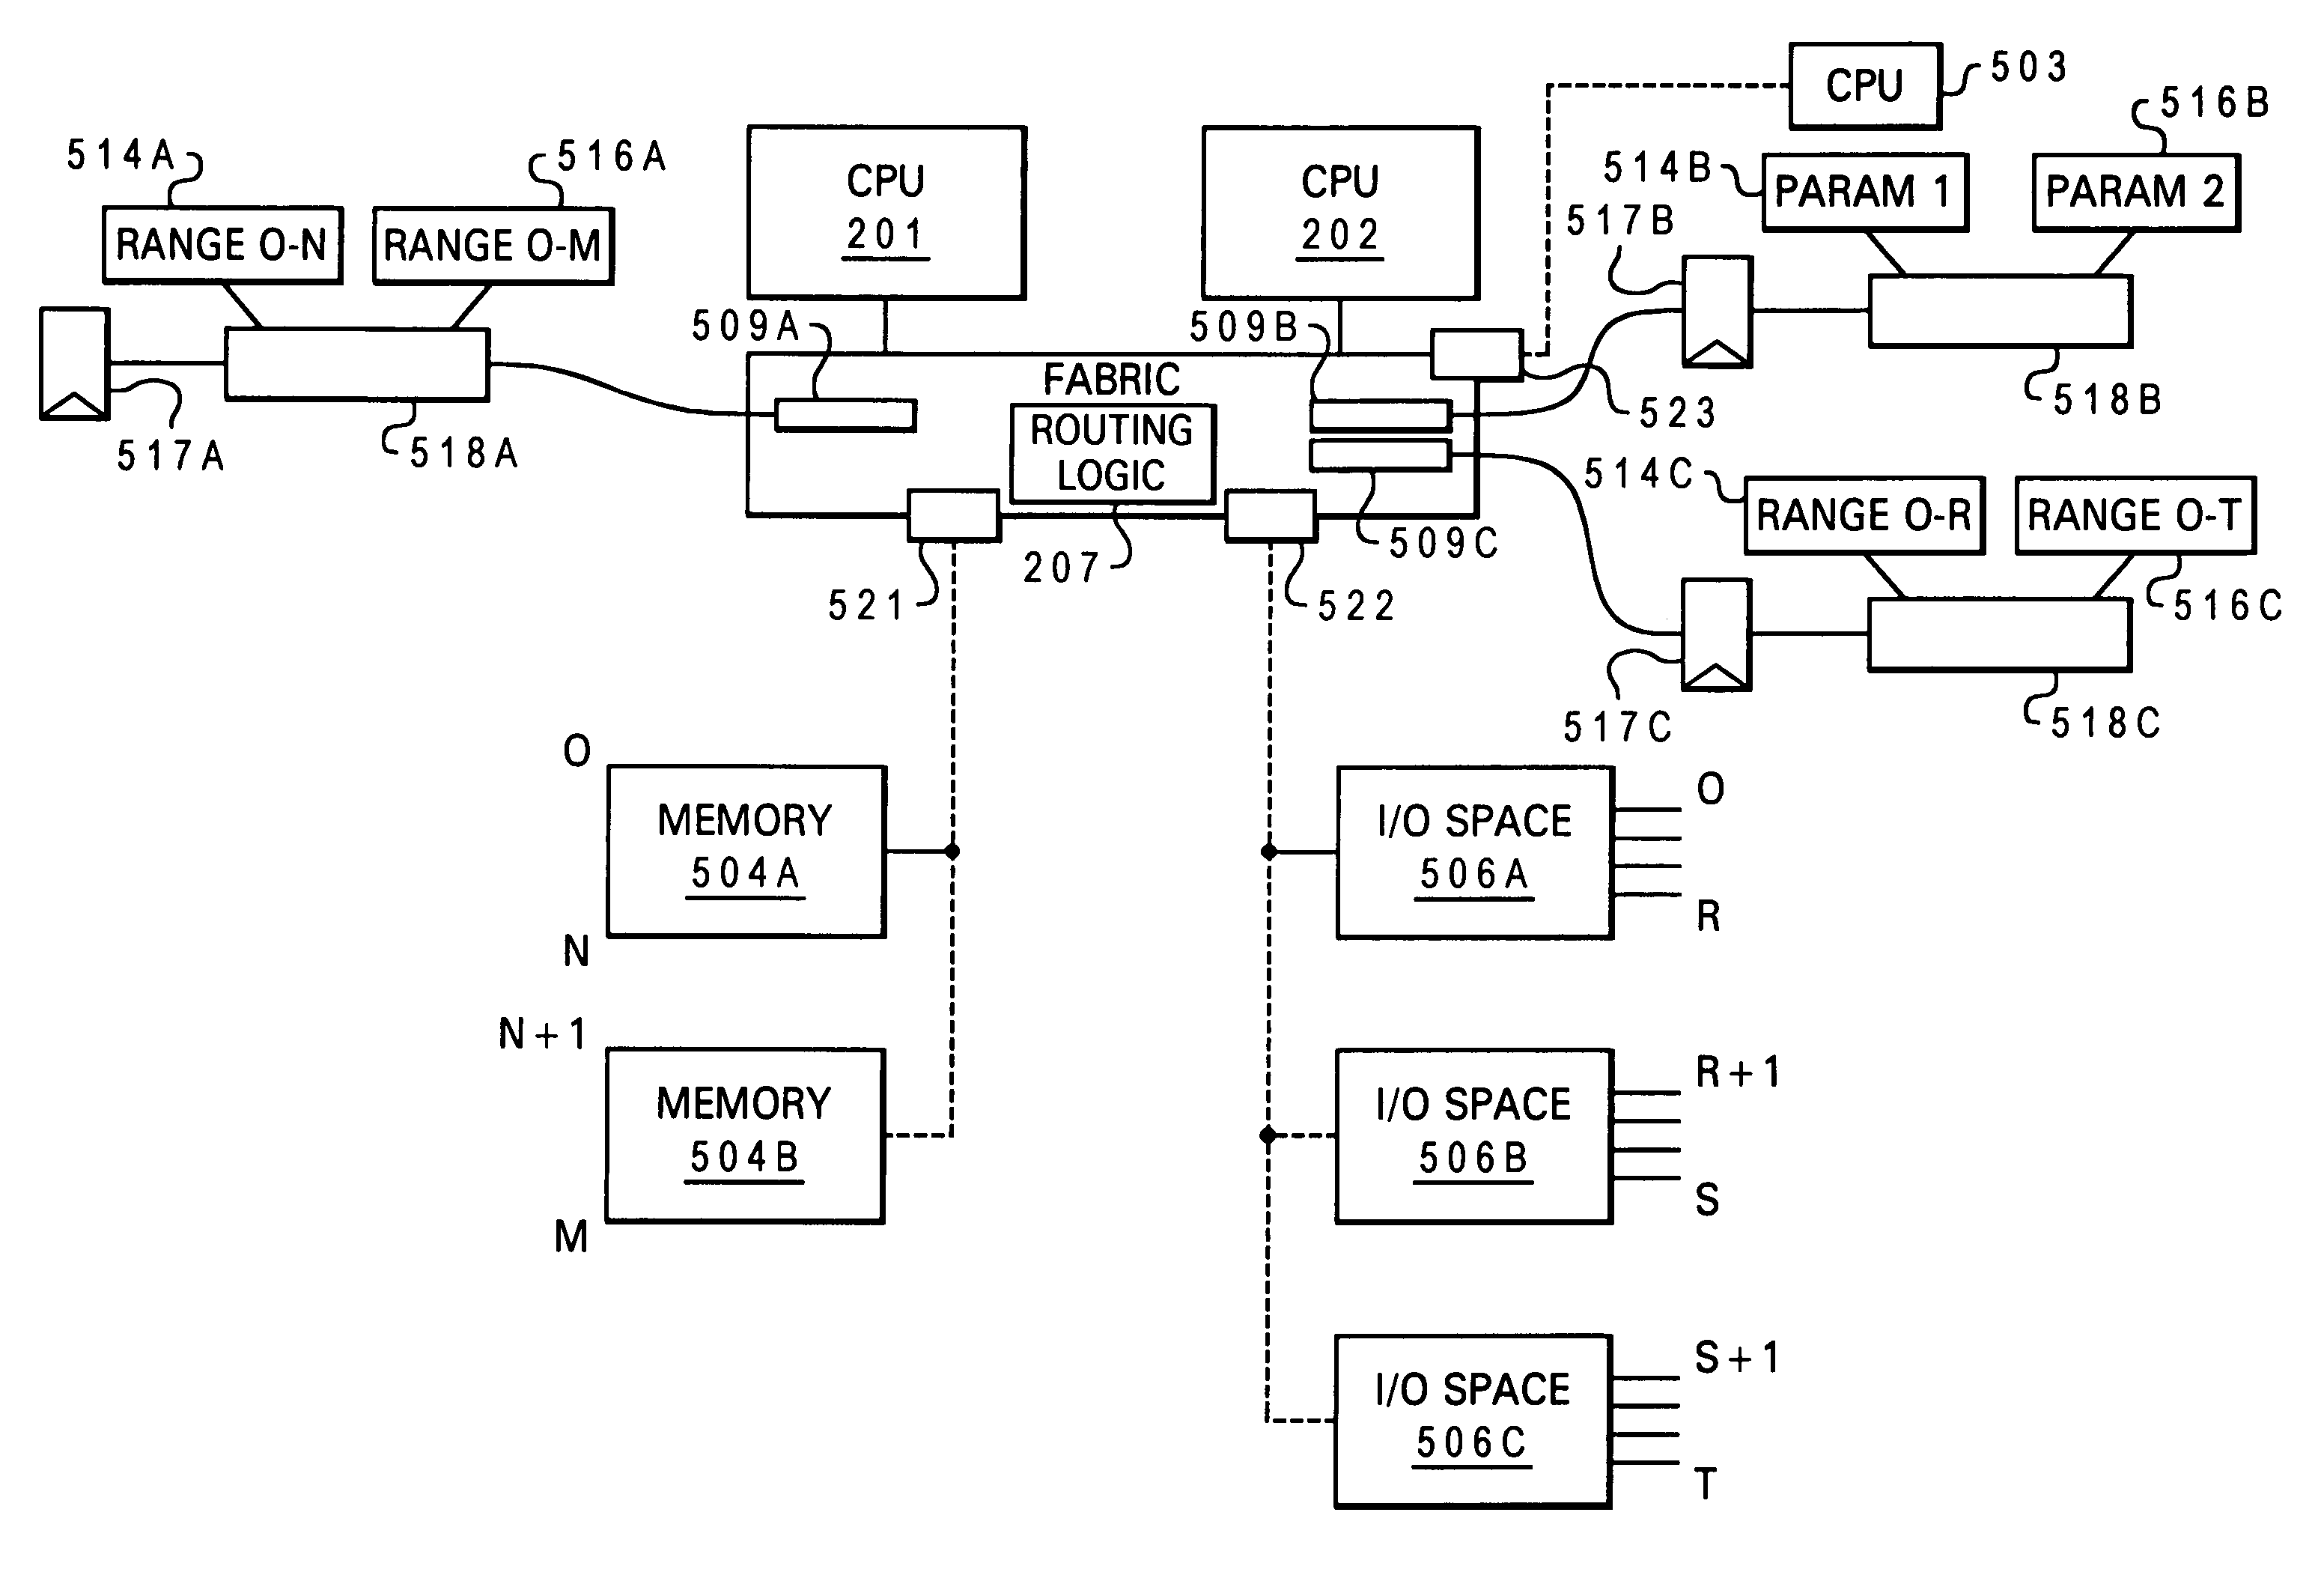 Non-disruptive, dynamic hot-add and hot-remove of non-symmetric data processing system resources